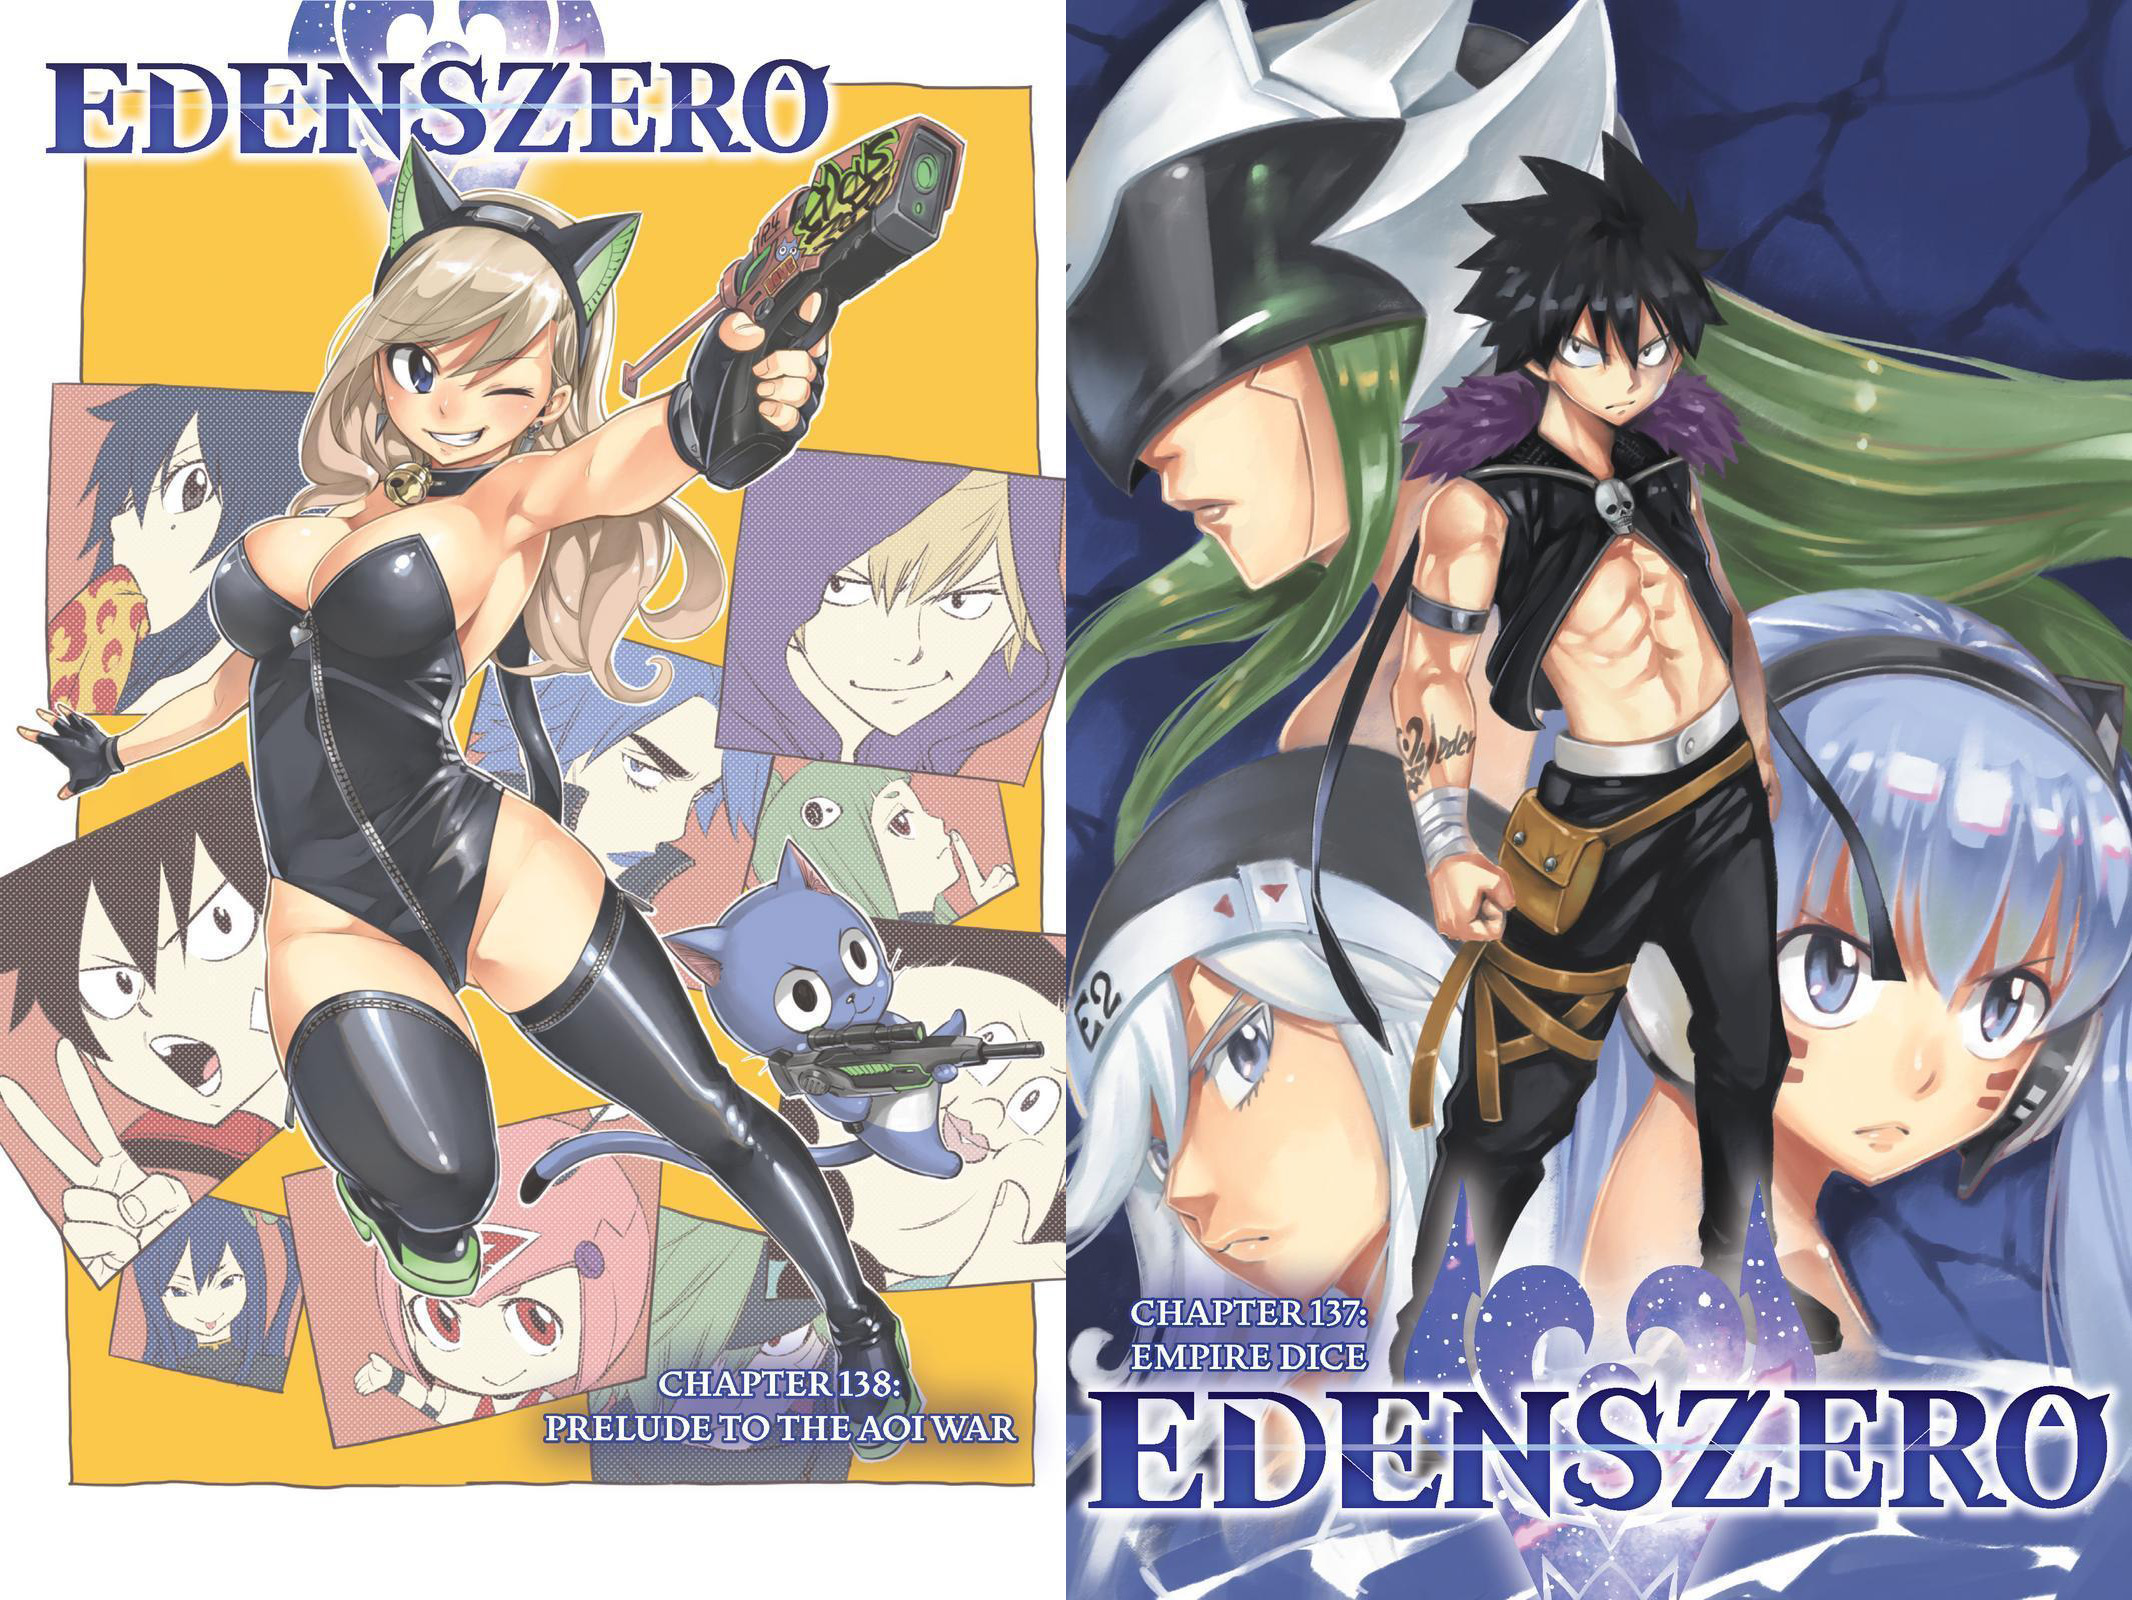 Edens Zero chapter 137 and chapter 138 colour spread pages